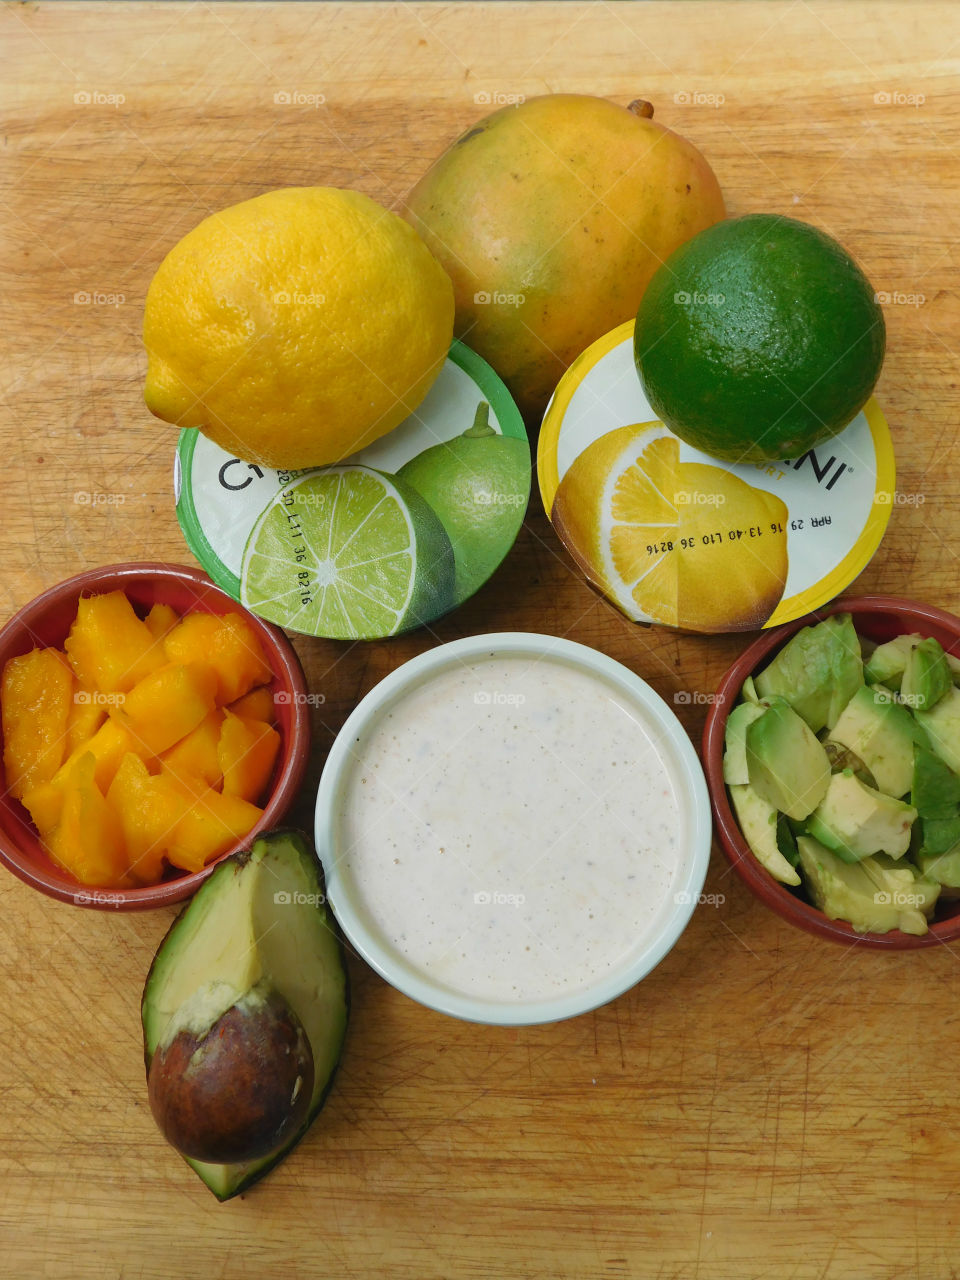 Illustration of Chobani Flat Lays, the perfect addition to any smoothie, creation or frozen treat!